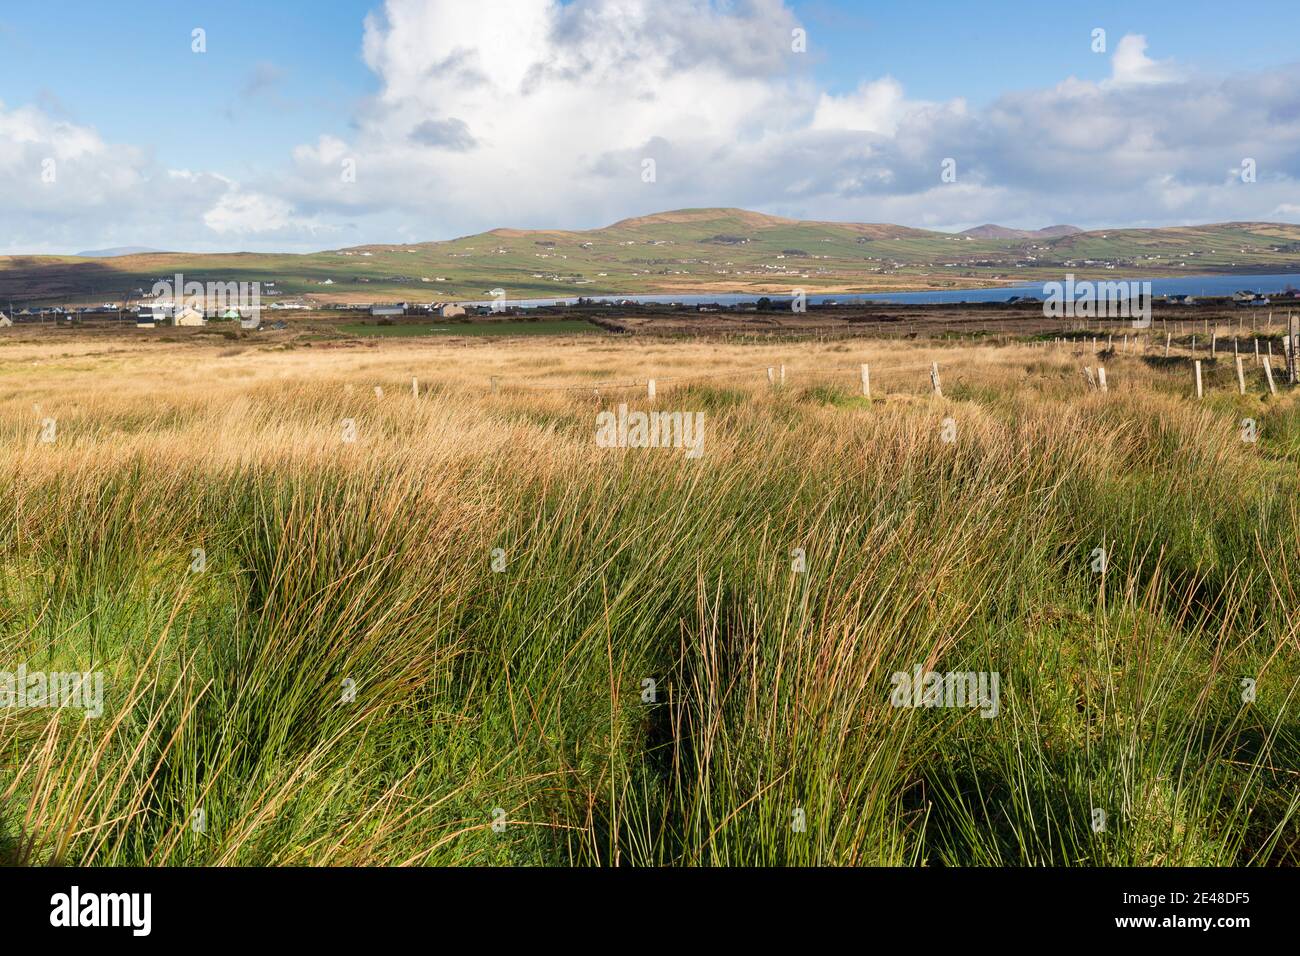 Rushes in farm field, Portmagee, County Kerry, Ireland Stock Photo